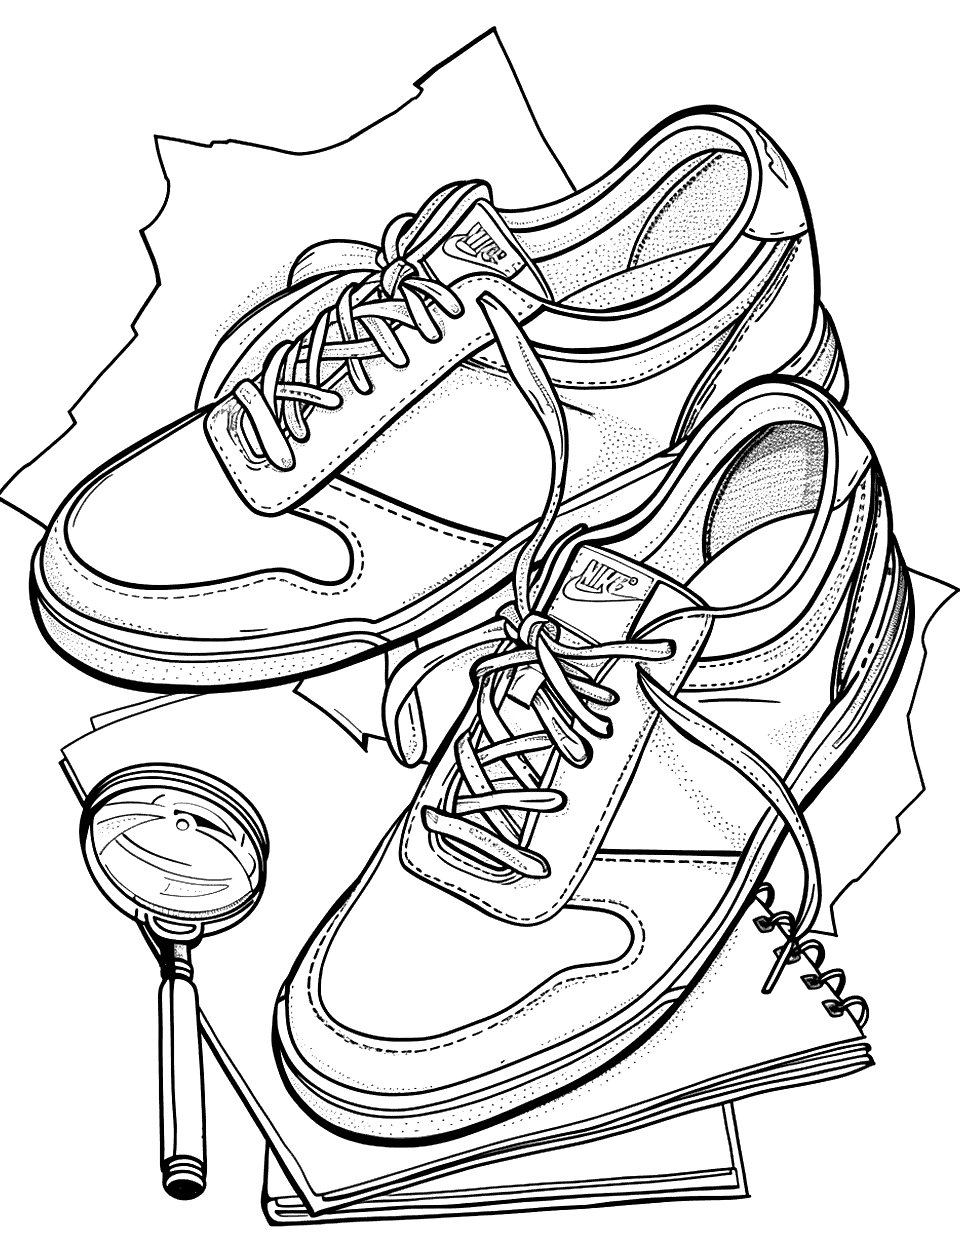 Detective Shoes at a Crime Scene Shoe Coloring Page - Sleuth-style shoes with a magnifying glass and a notebook.